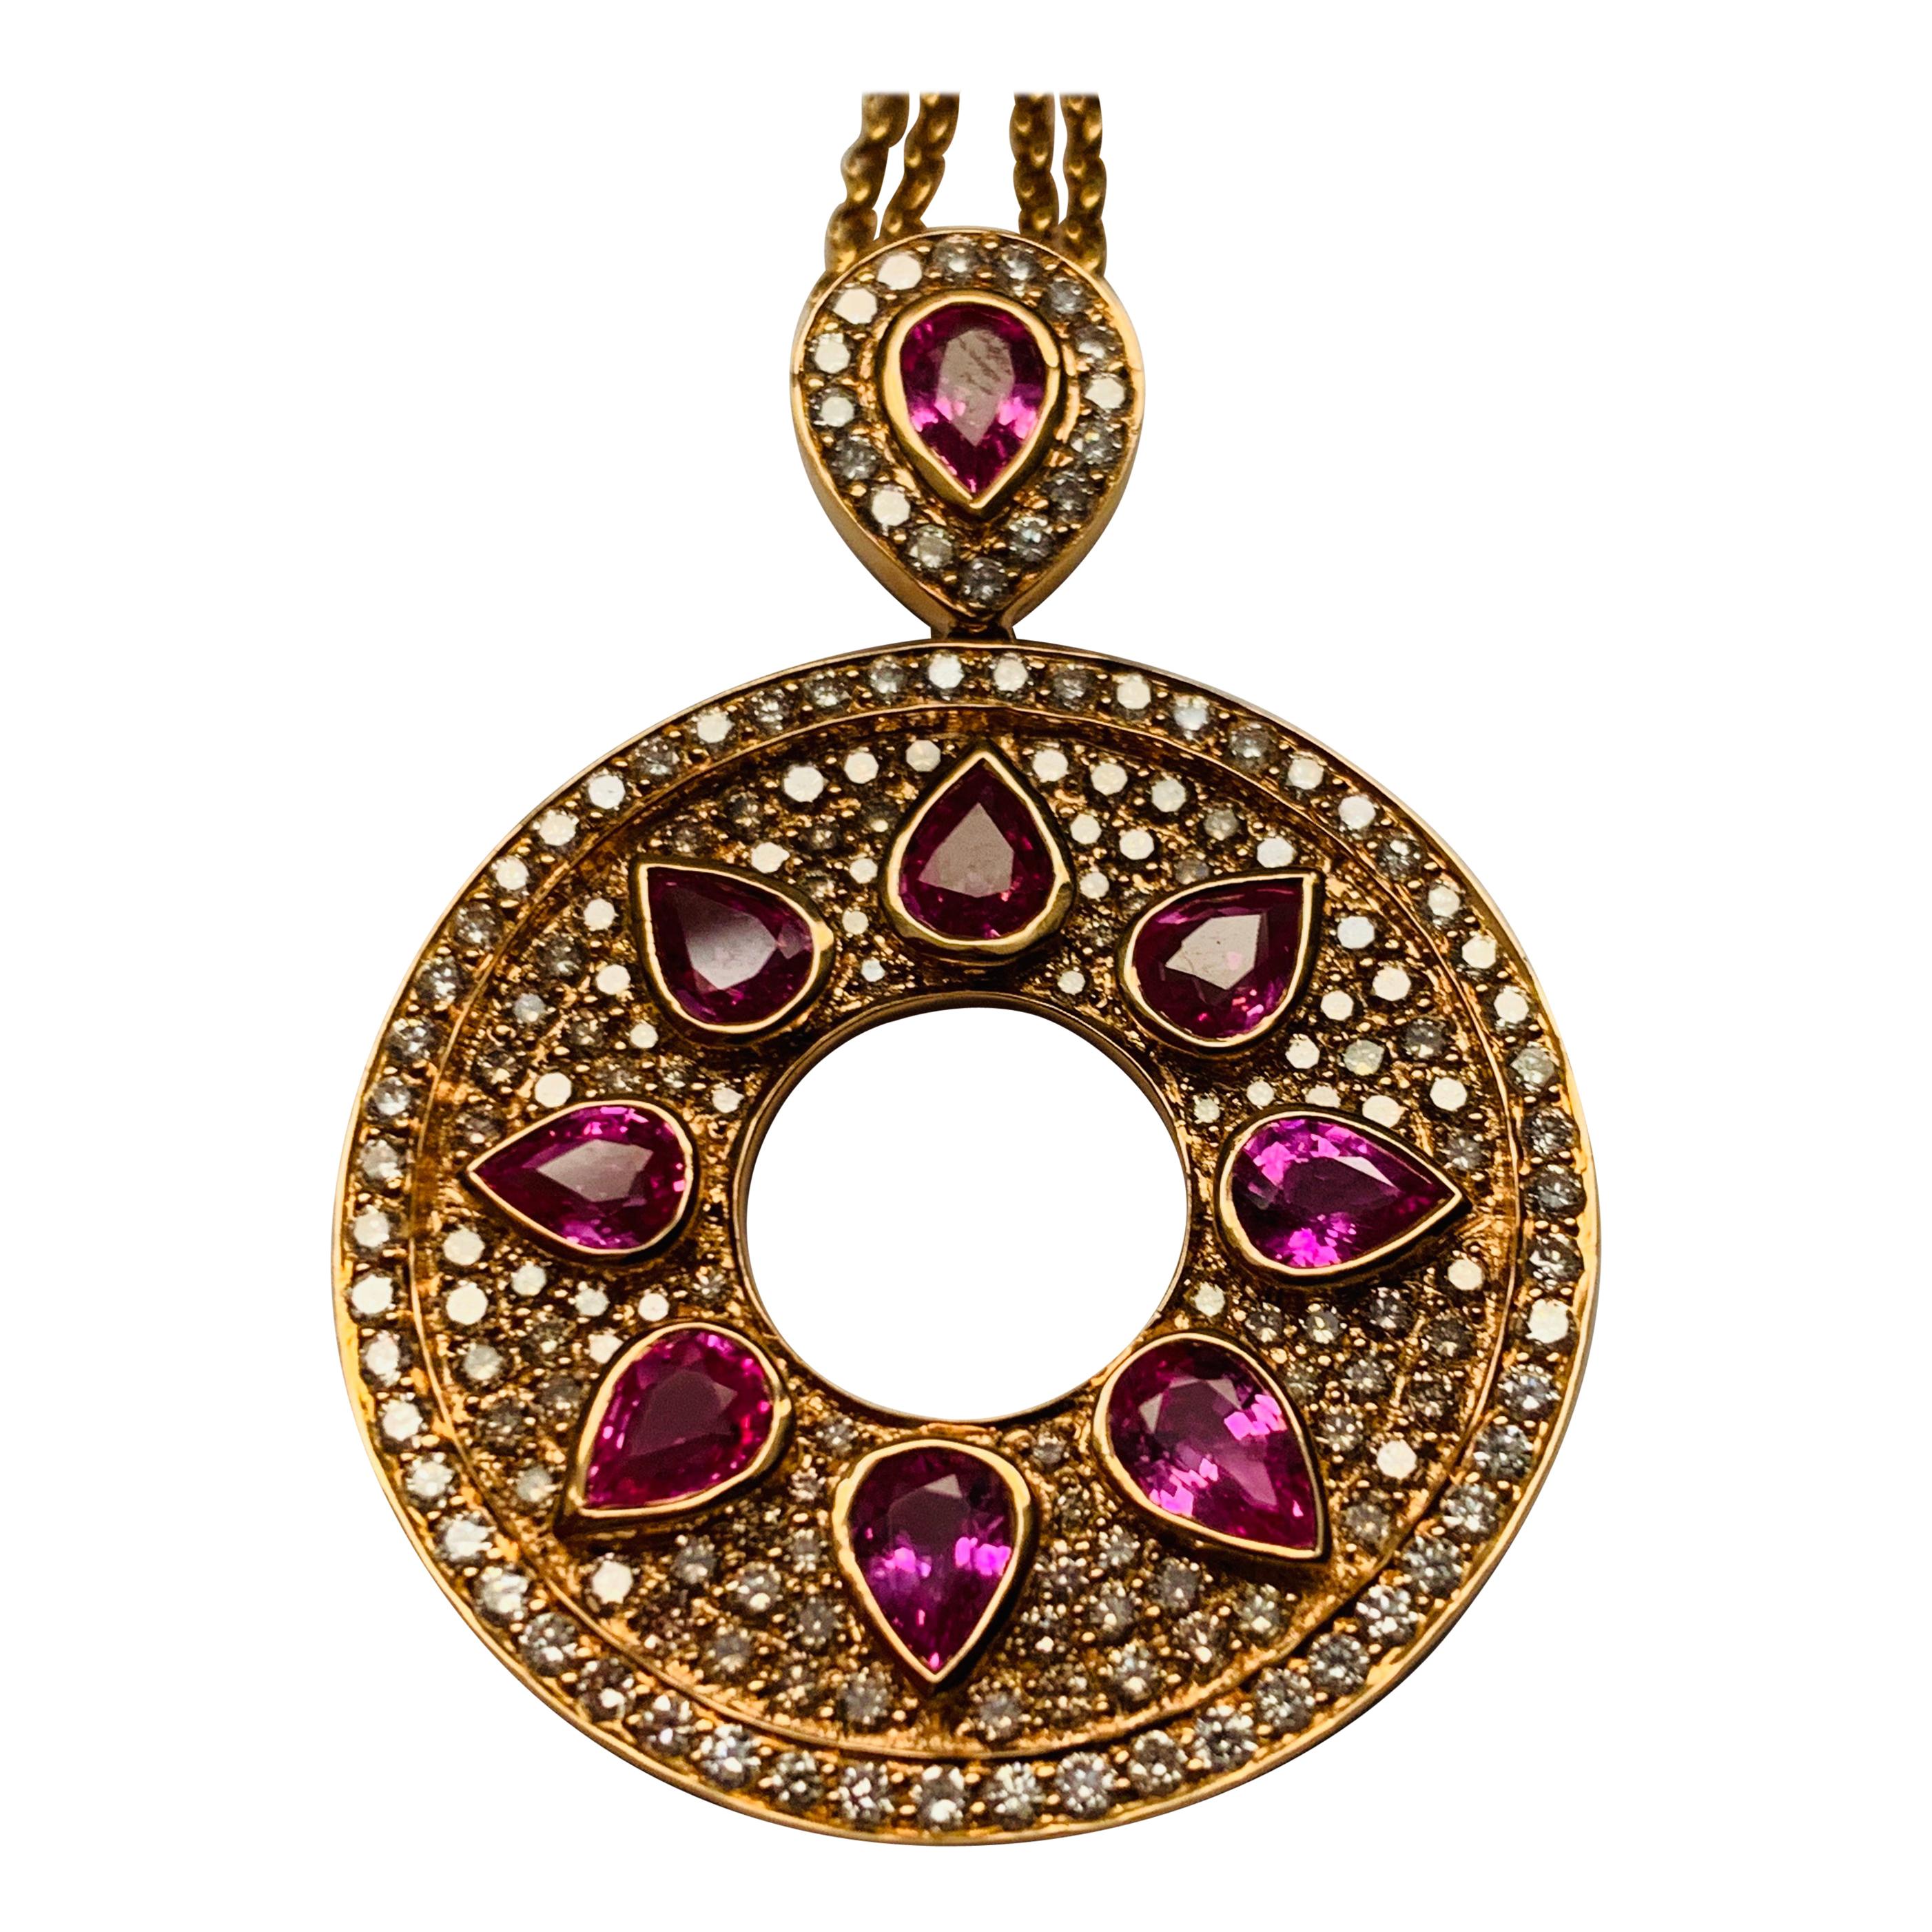 Mysterious 18 Karat Gold Pink Sapphire and Diamond Pendant with Chain